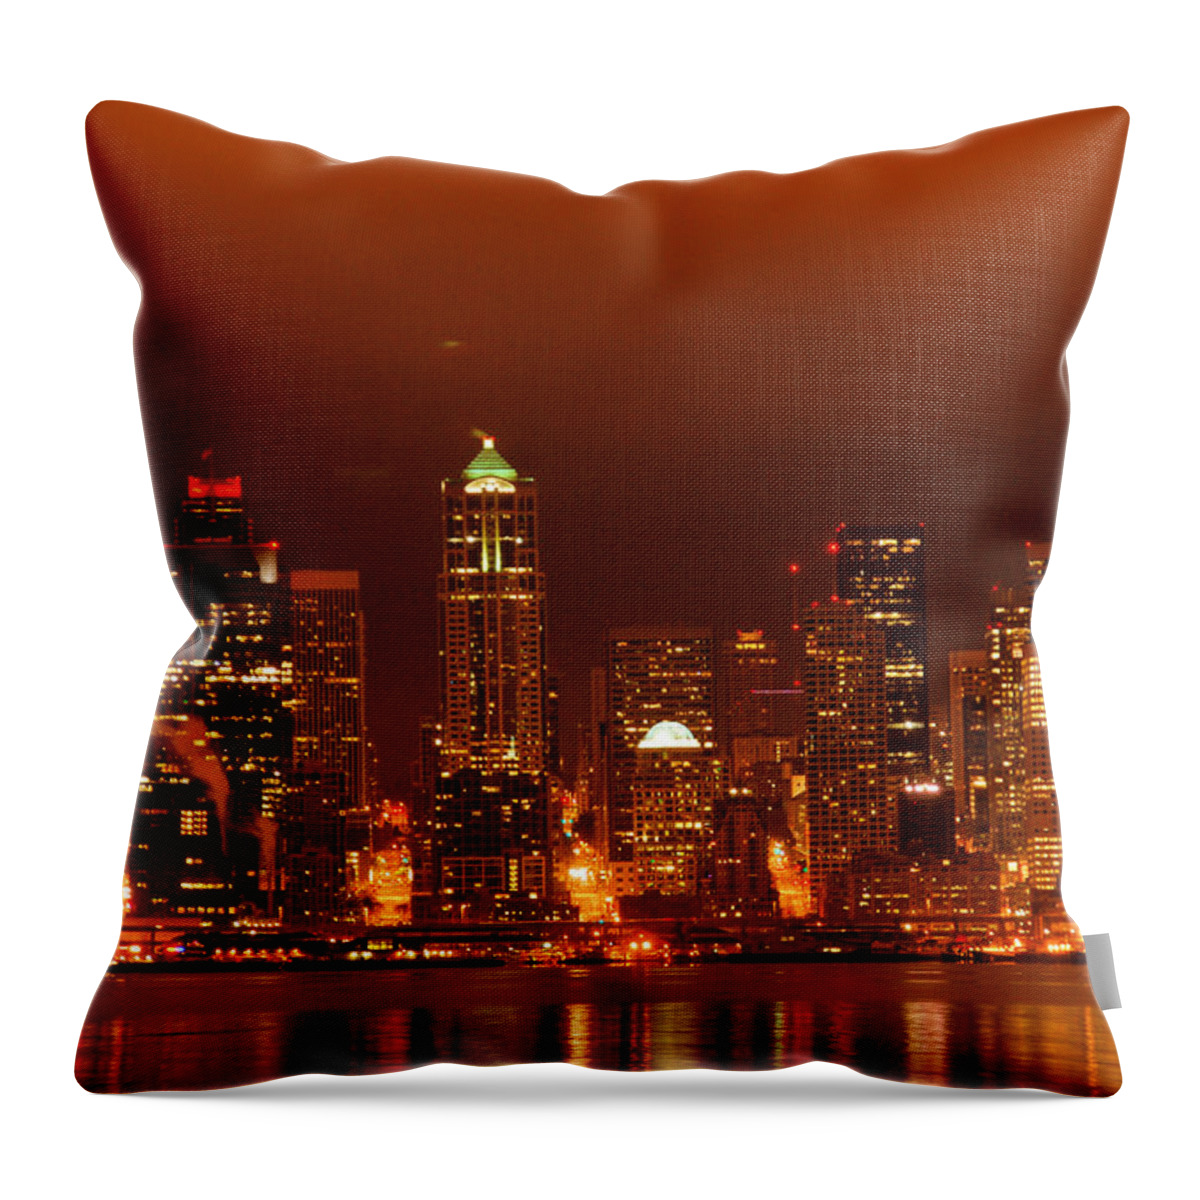 Seattle Throw Pillow featuring the photograph Seattle Skyline by Michael Merry